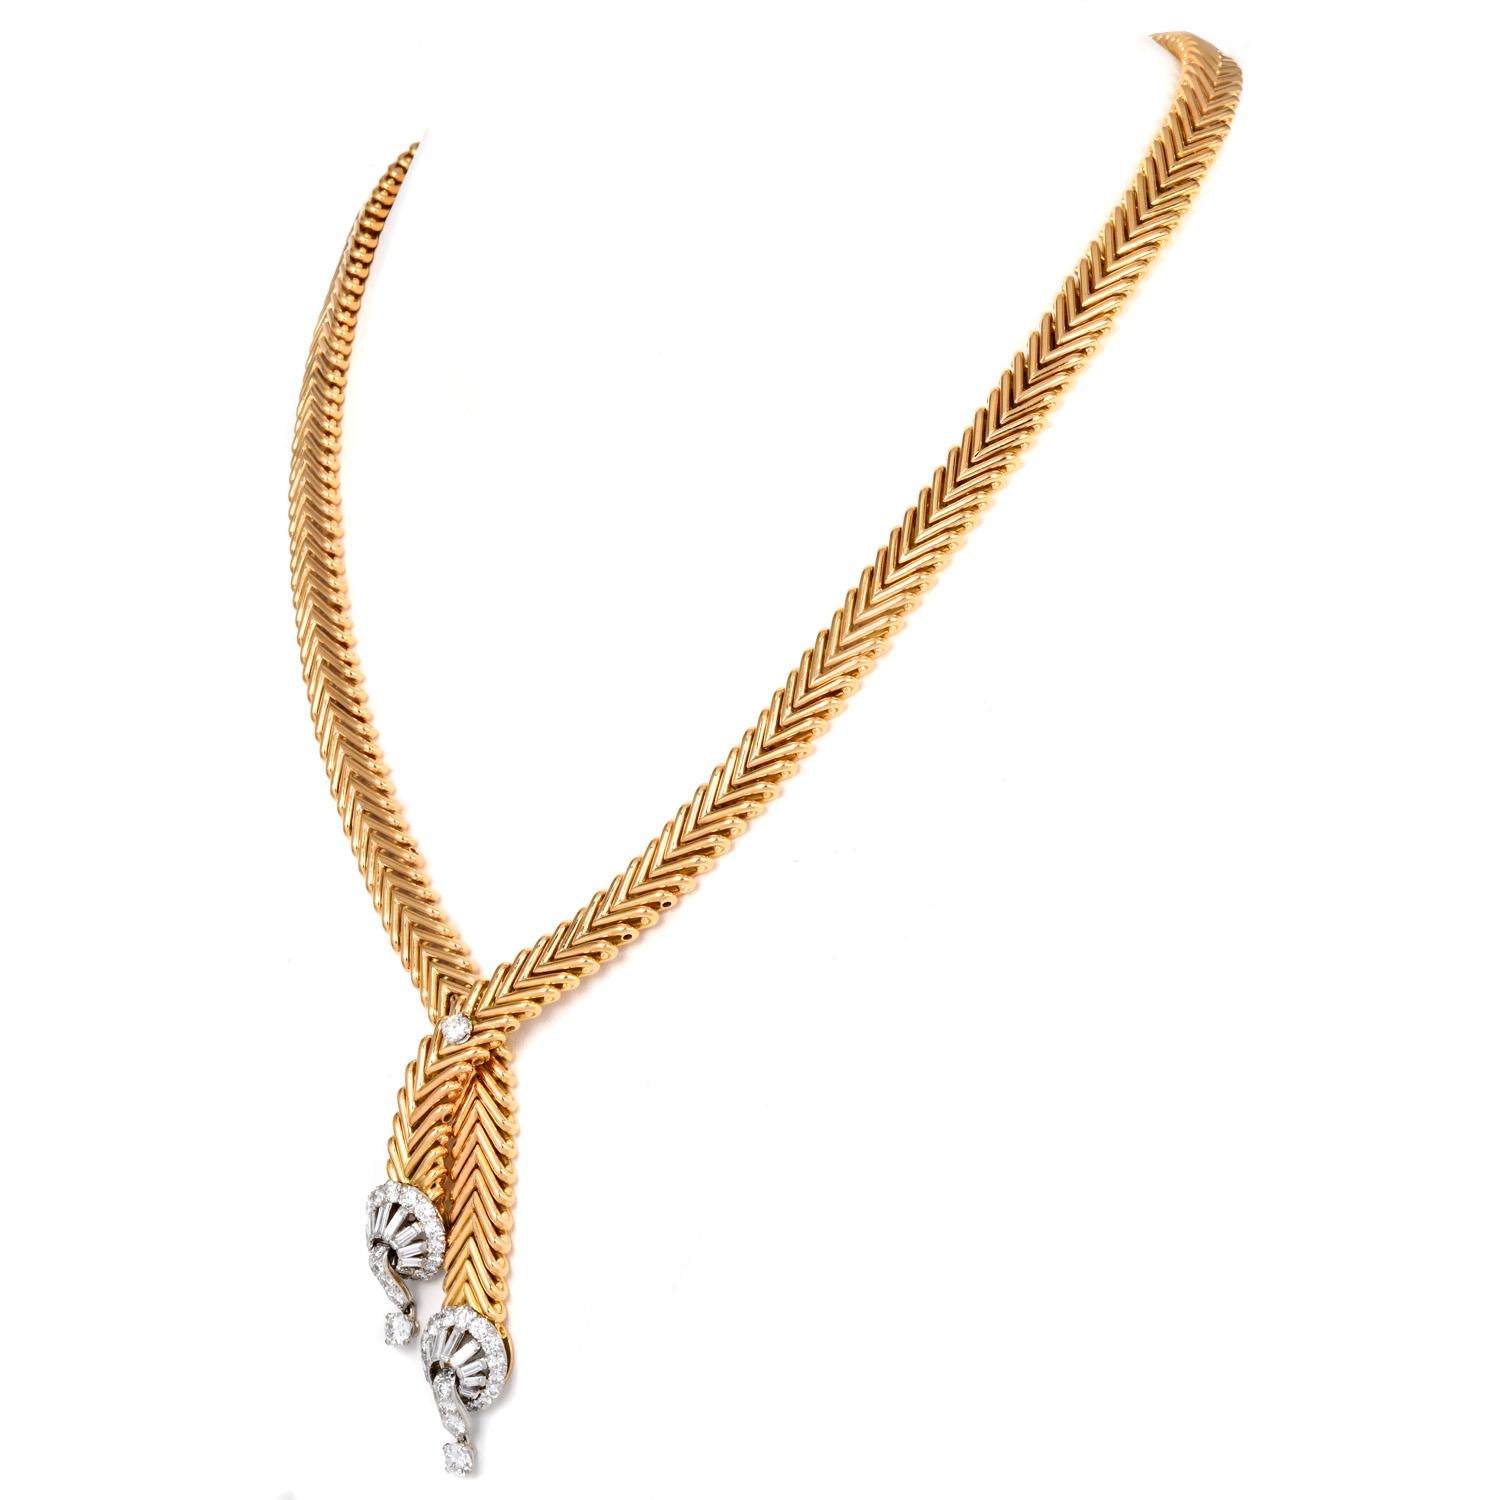 From The House of Marchak with love. This masterpiece lariat necklace features a wide V-link design, masterfully crafted in solid 18K yellow gold from a well-known French maker Marchak Paris.
It presents a bold statement with its long, crossover